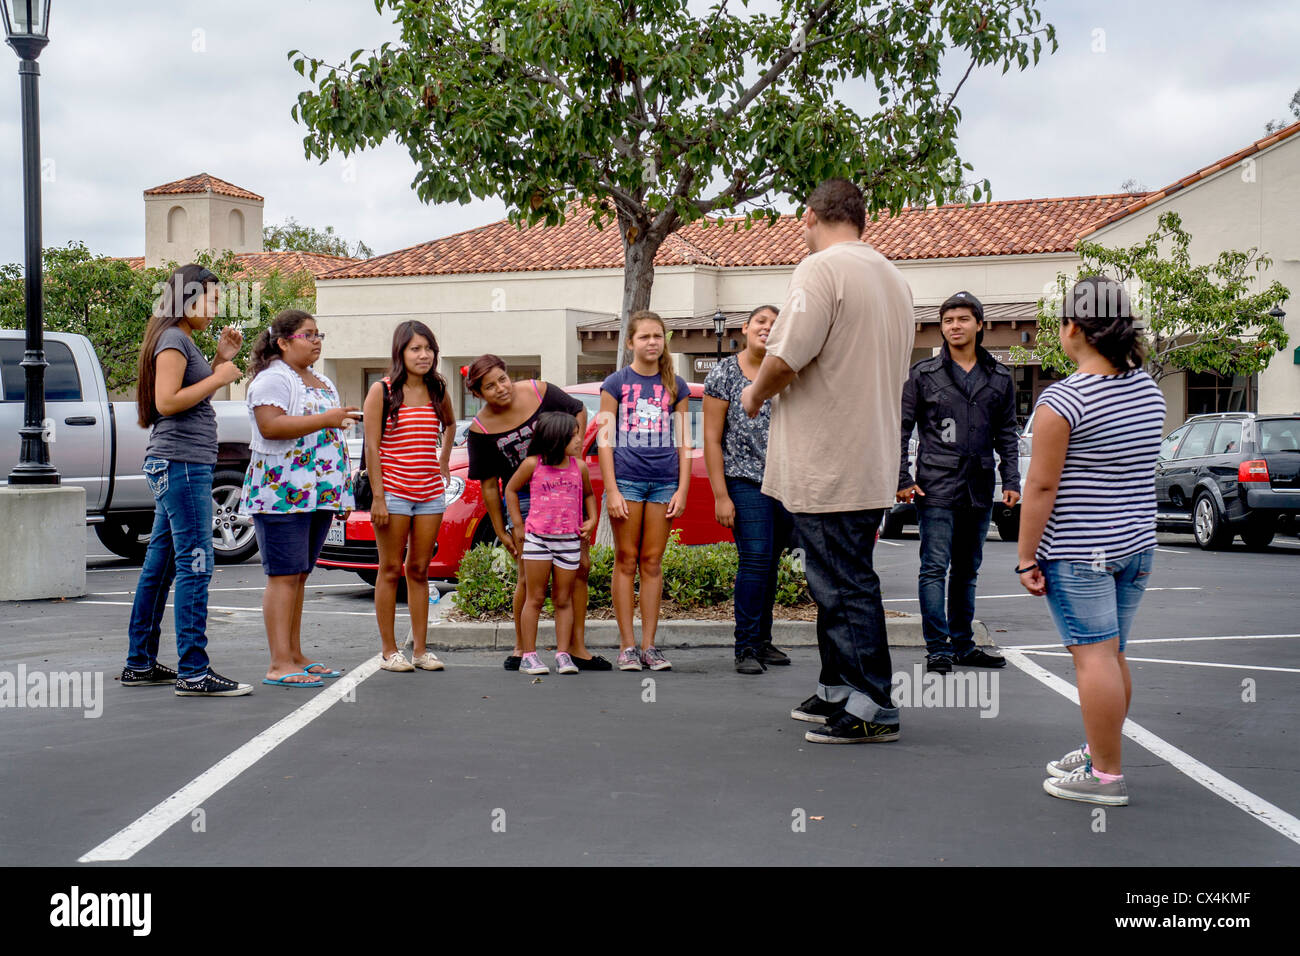 A interracial group of children yells 'stop' to a bully intimidating a child (foreground) in a California parking lot. Stock Photo